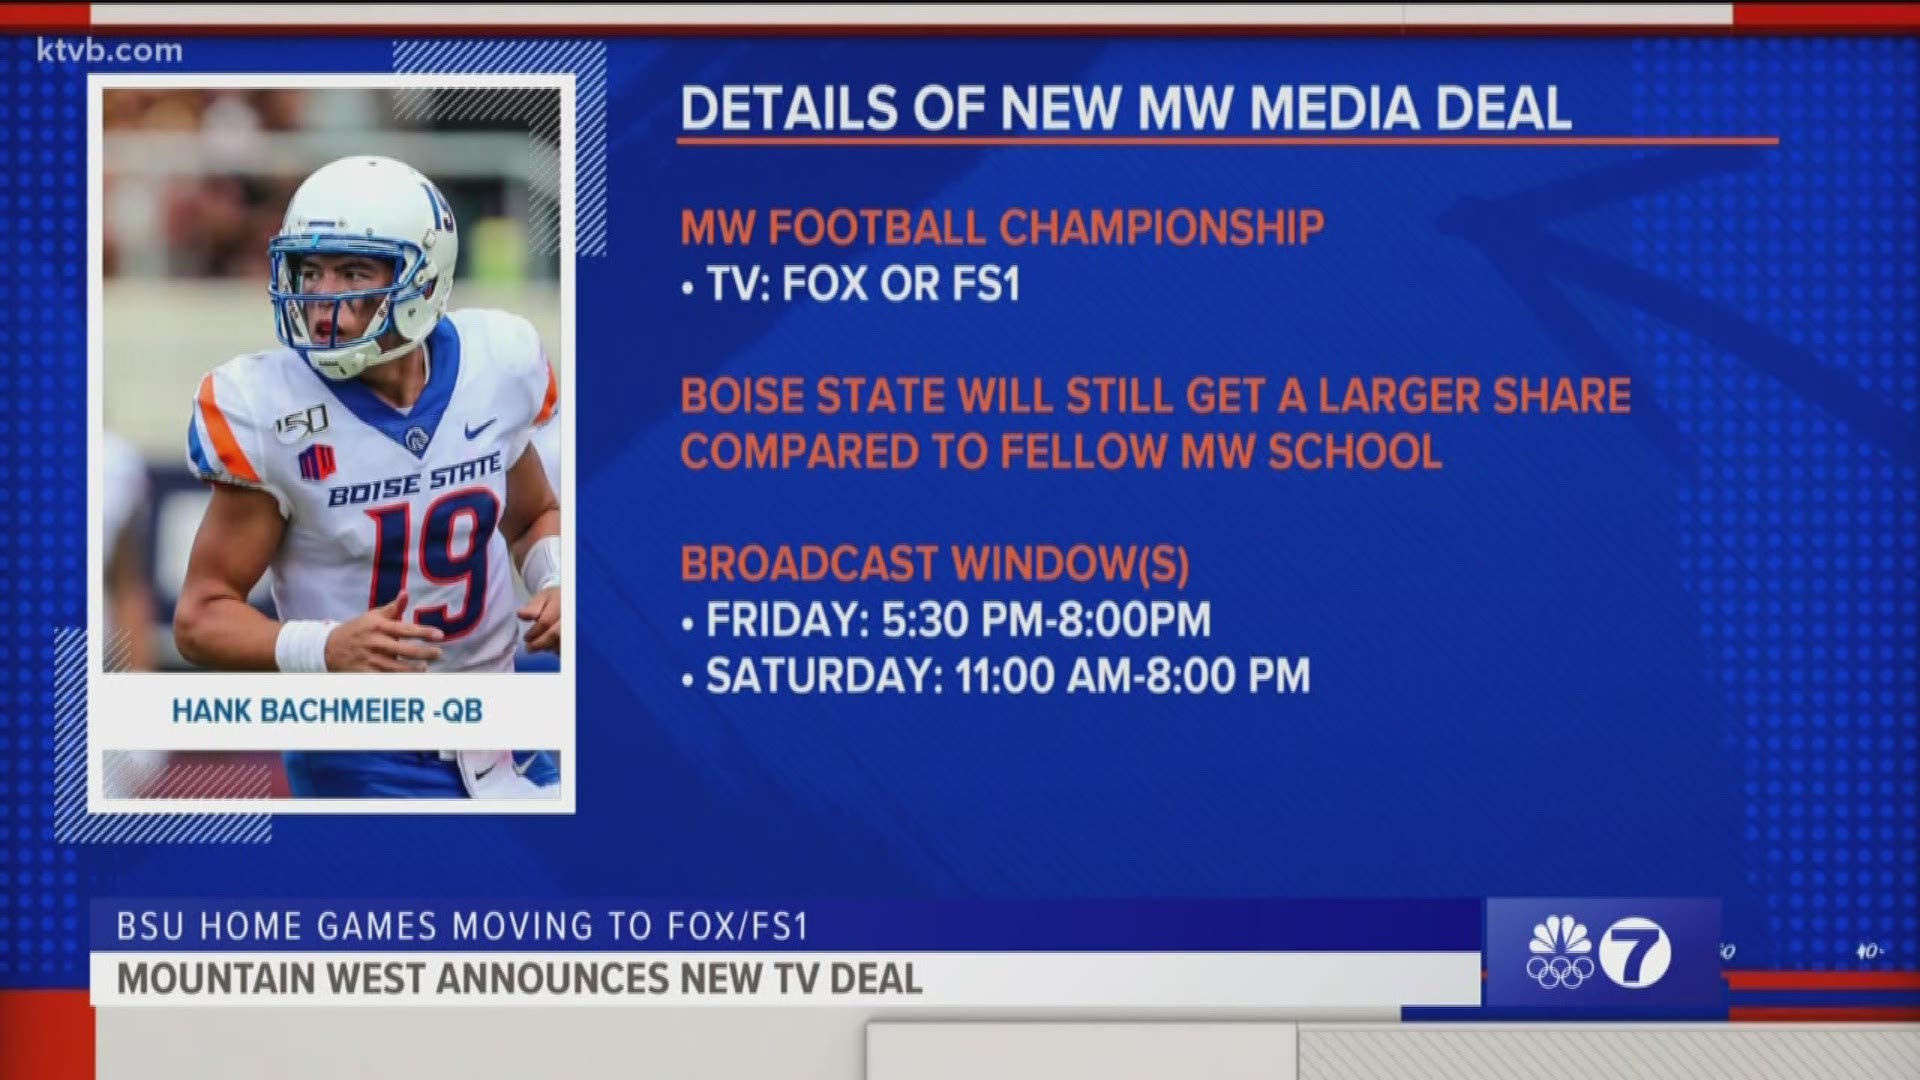 The new 6-year, $270 million deal between the MWC, Fox, and CBS means big changes are on the way for Boise State football games and the program.